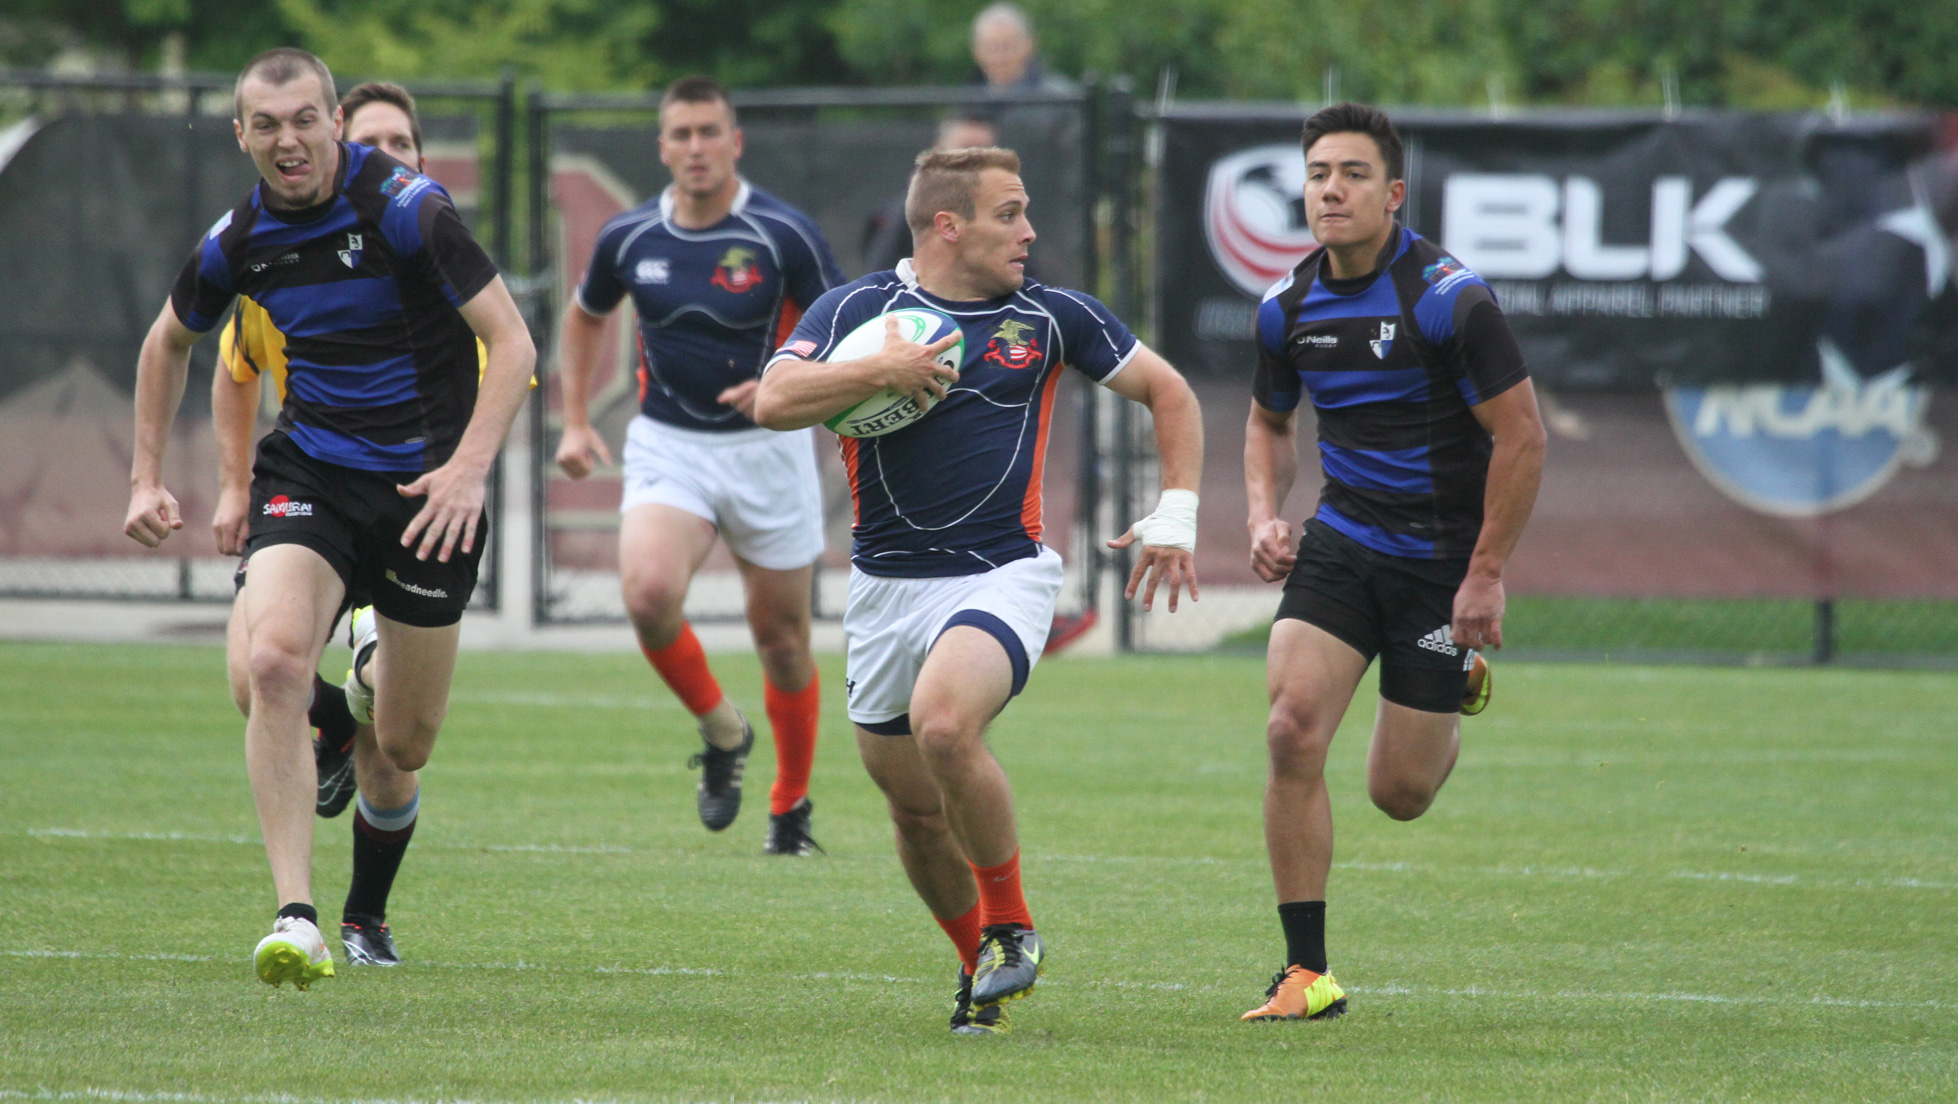 USA College 7s: Fighting Penguins get through College 7s pool play unscathed